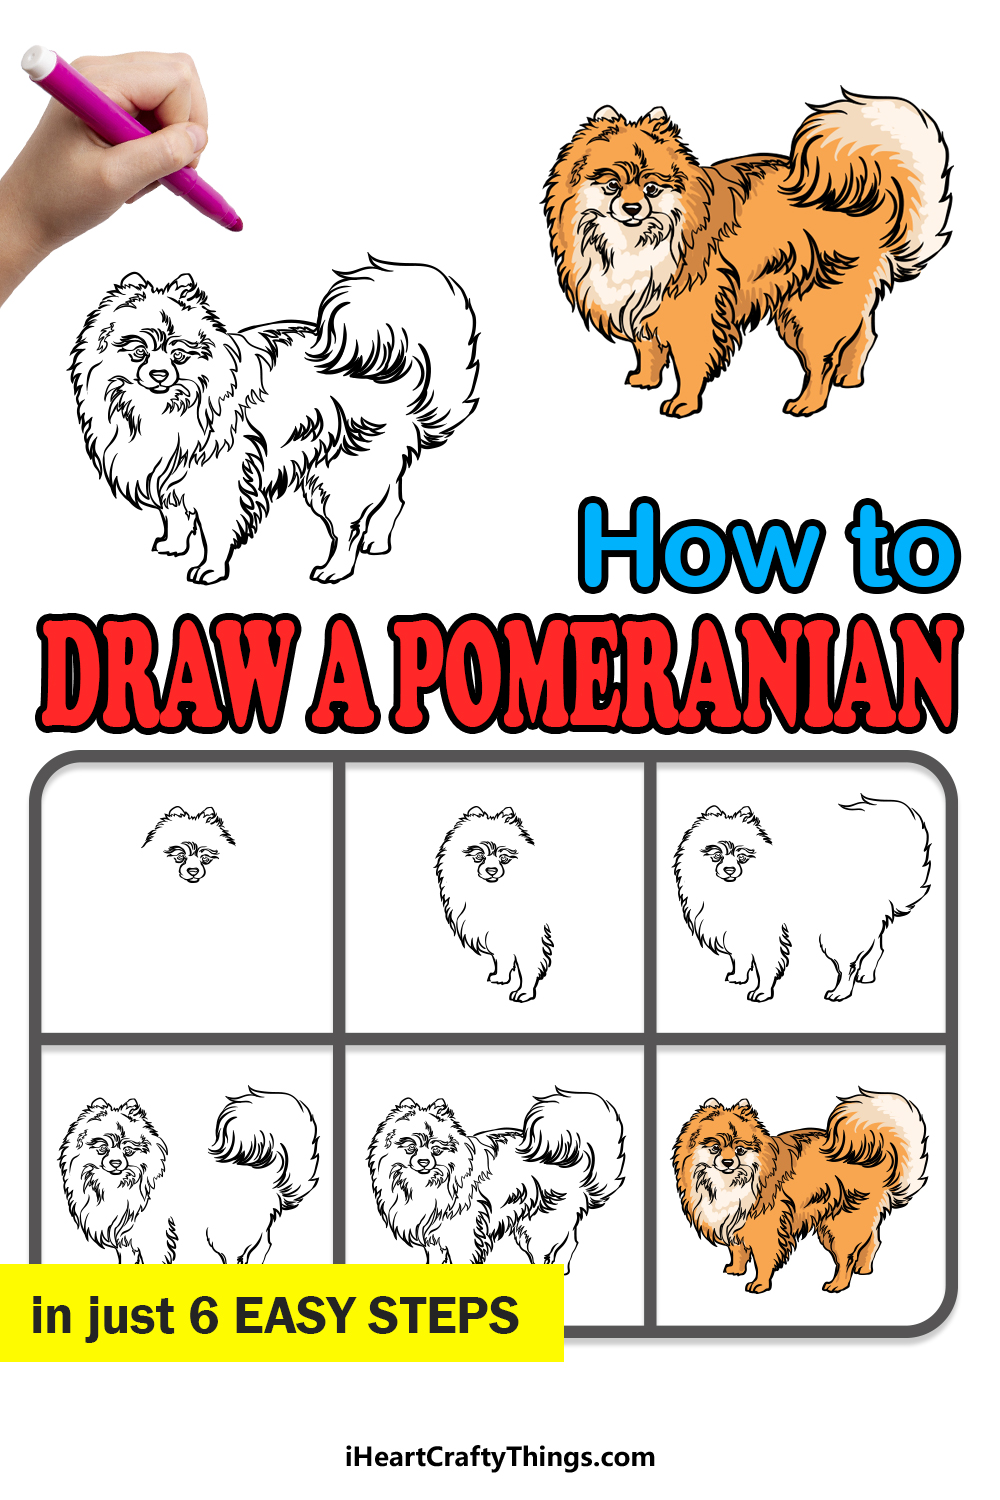 how to draw a Pomeranian in 6 easy steps